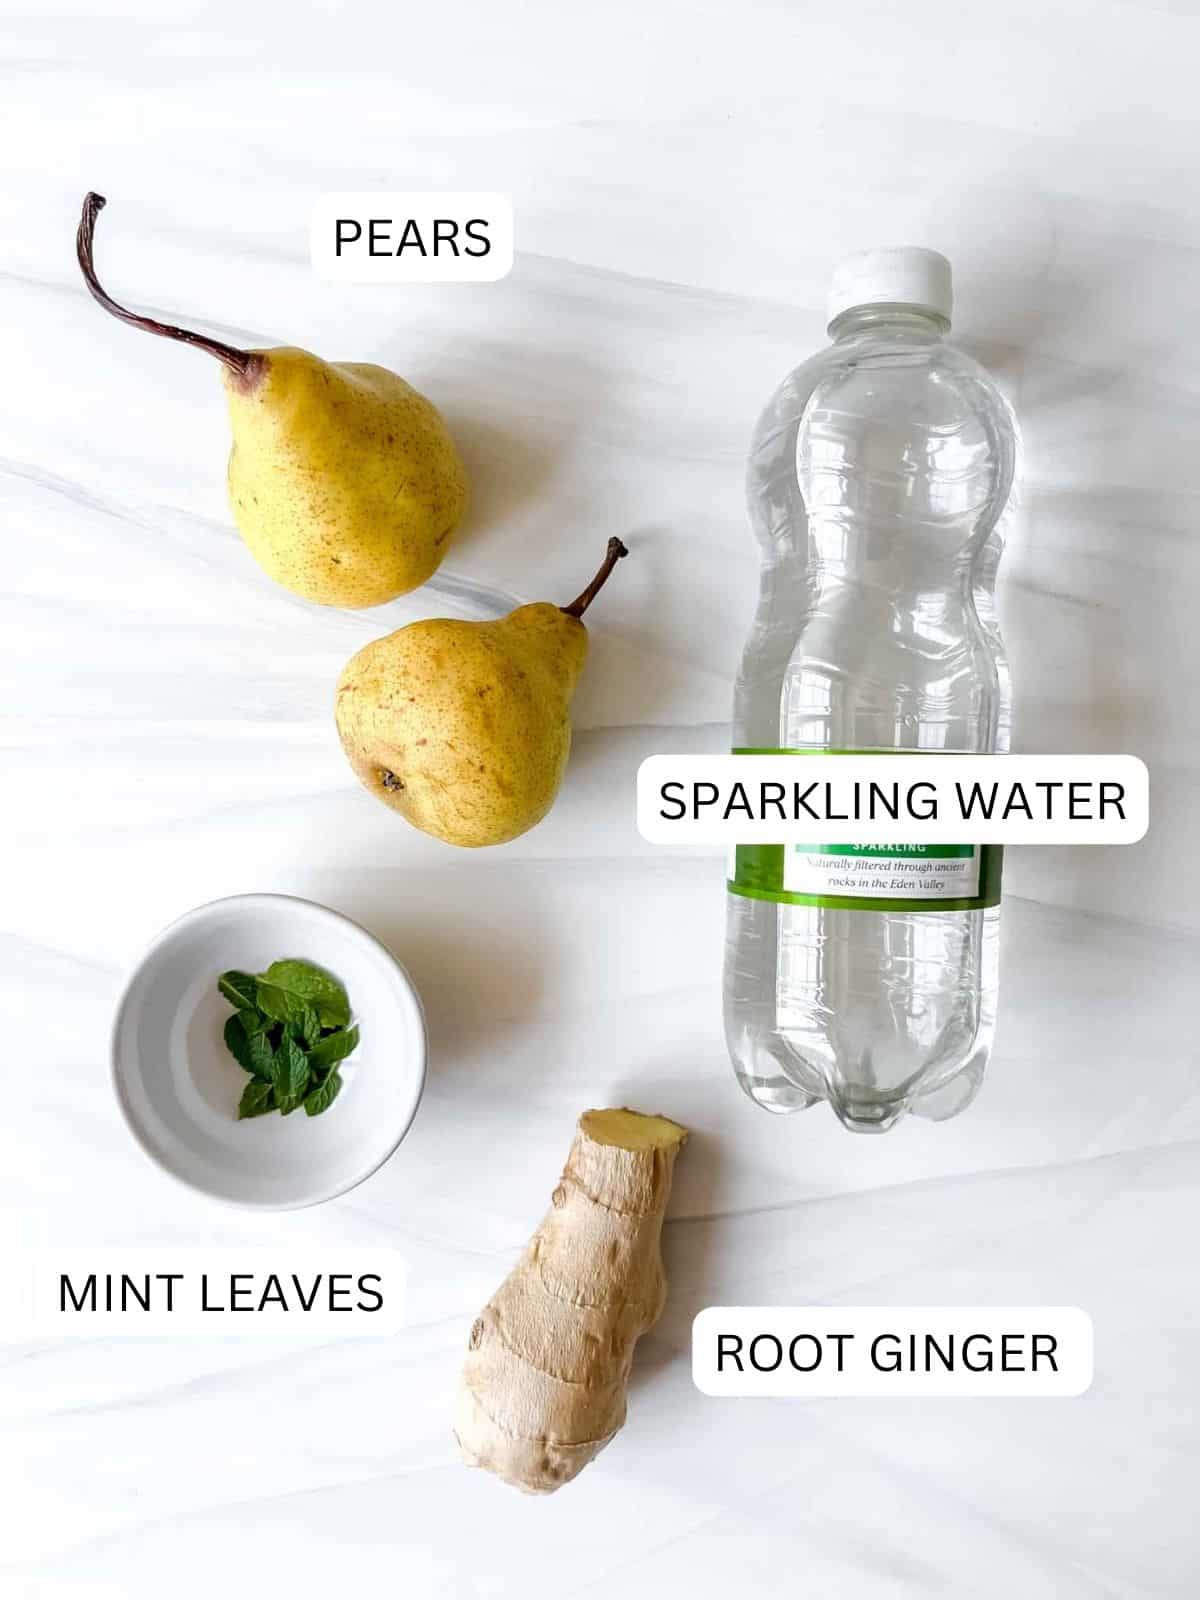 individually labelled sparkling water, pears, mint leaves and root ginger.